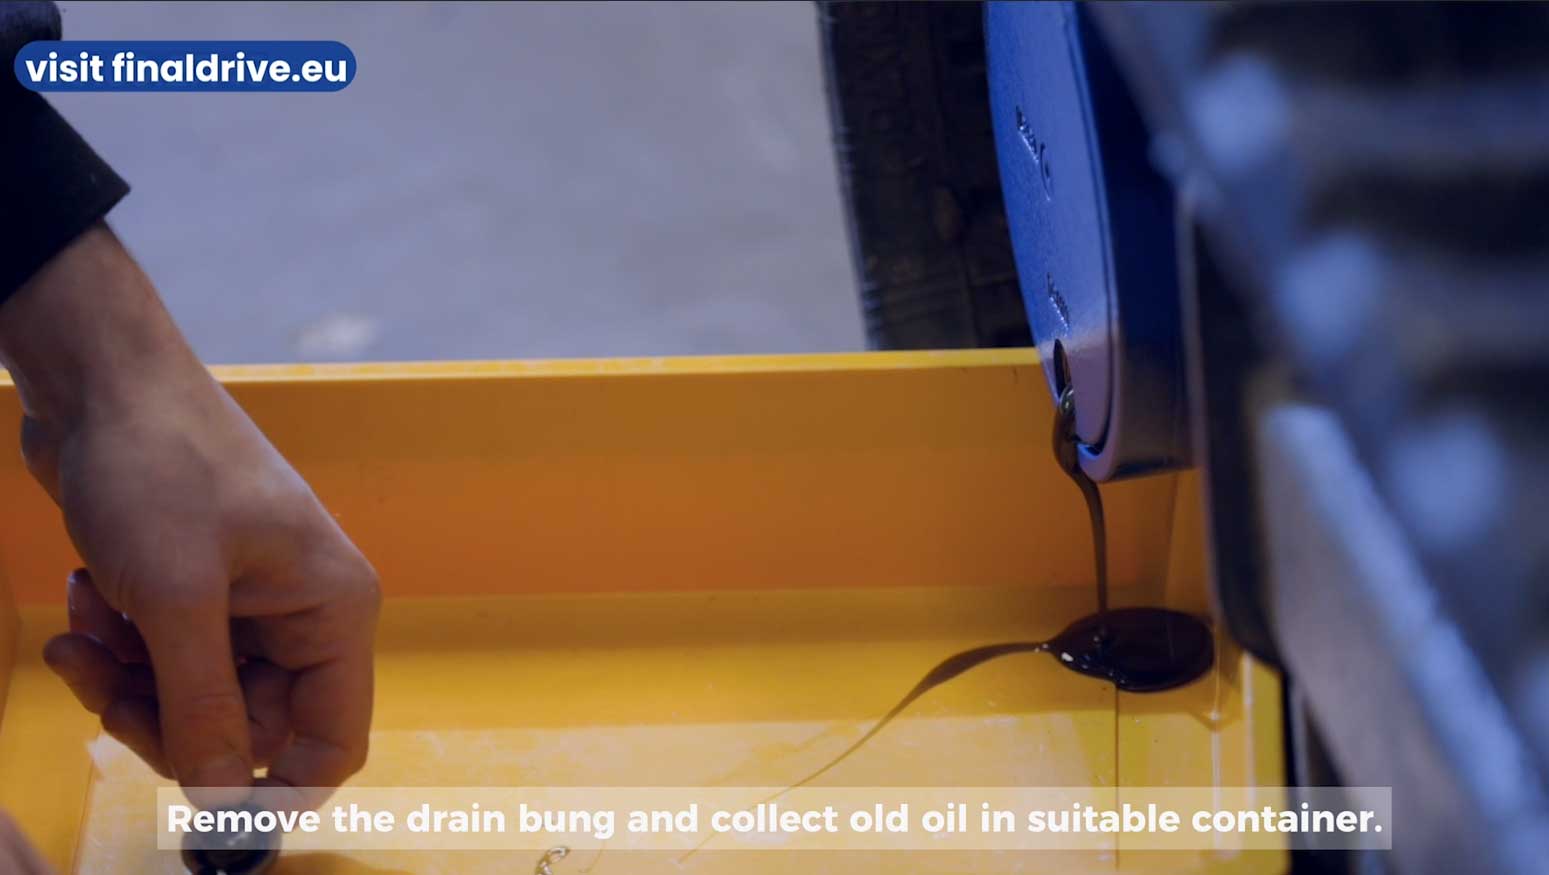 Remove the drain bung and collect old oil in suitable container